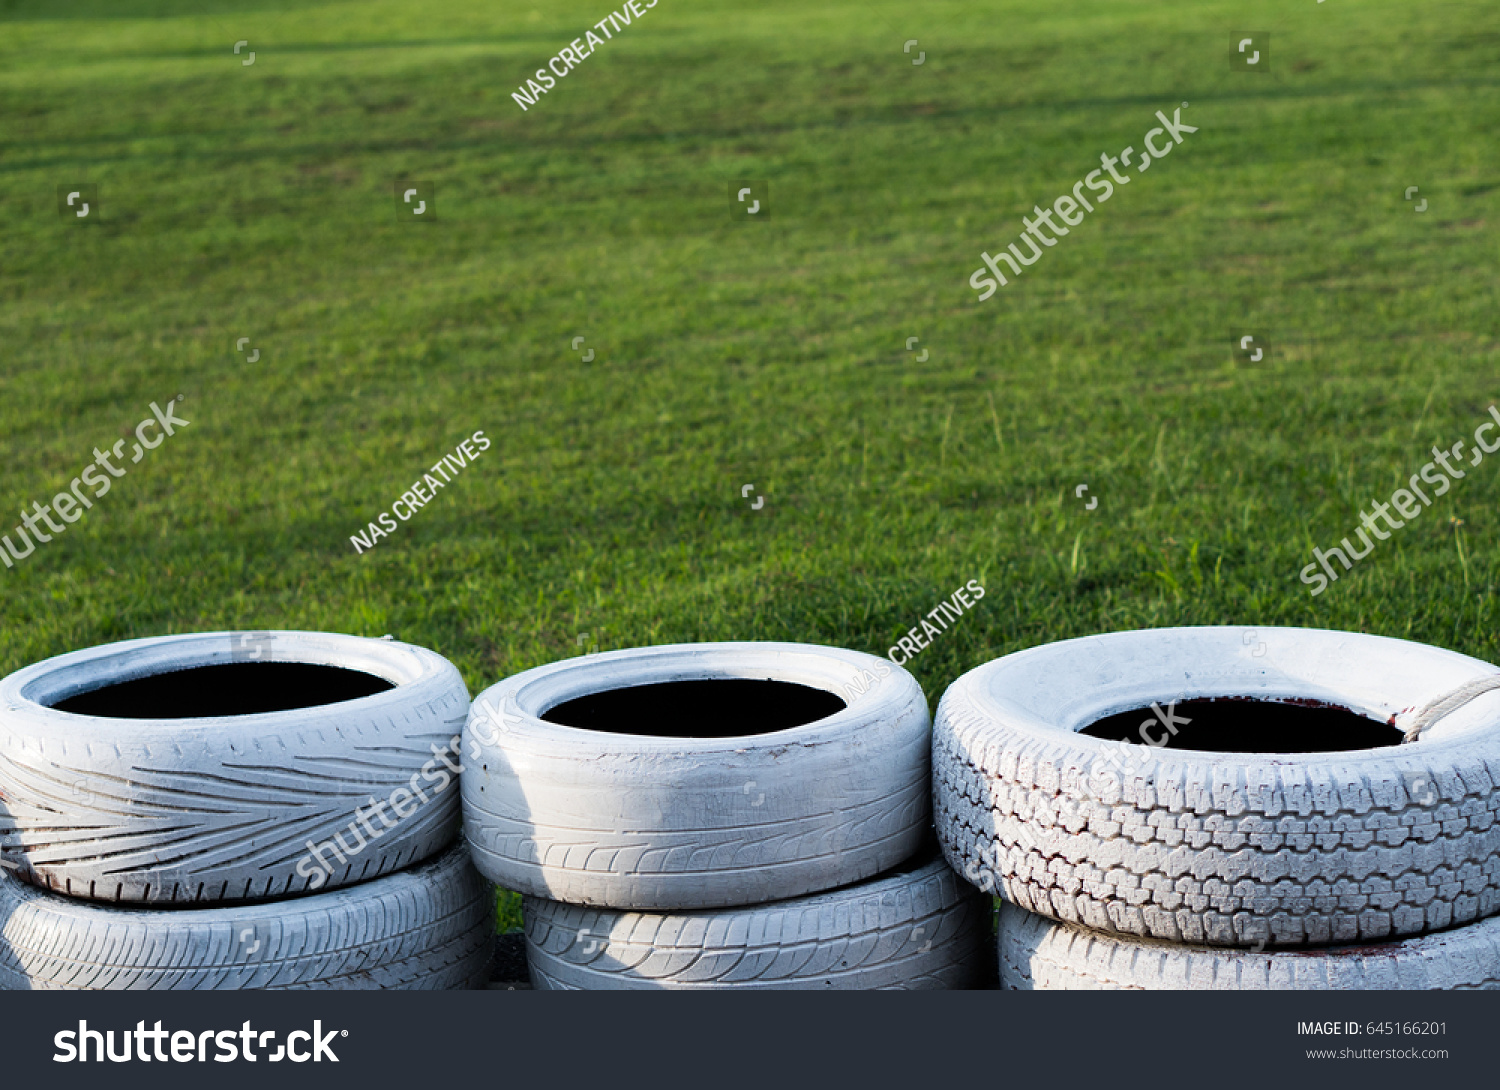 Painted white old tires on kart race course over green grass background #645166201